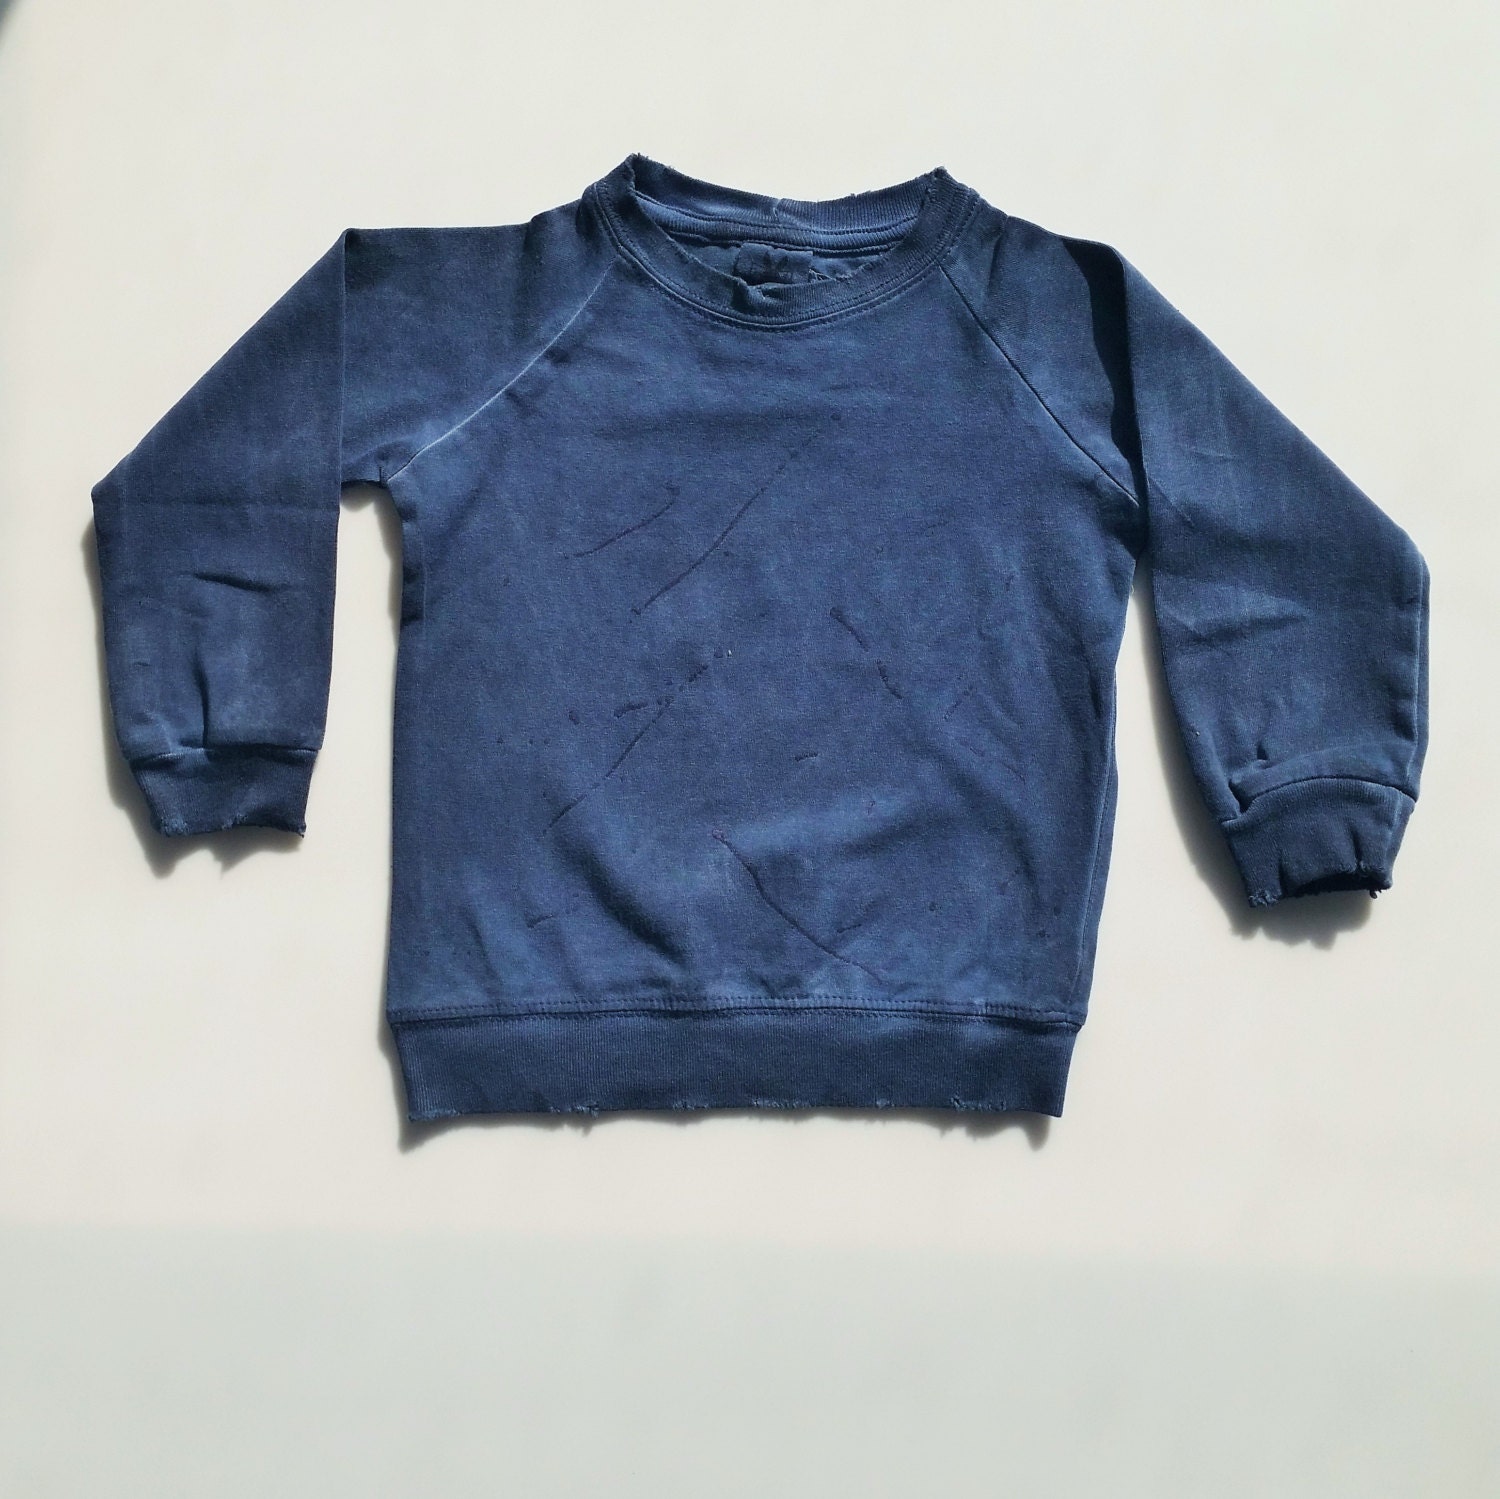 Boys long sleeves shirt Toddlers super cool and soft by TULIBERT